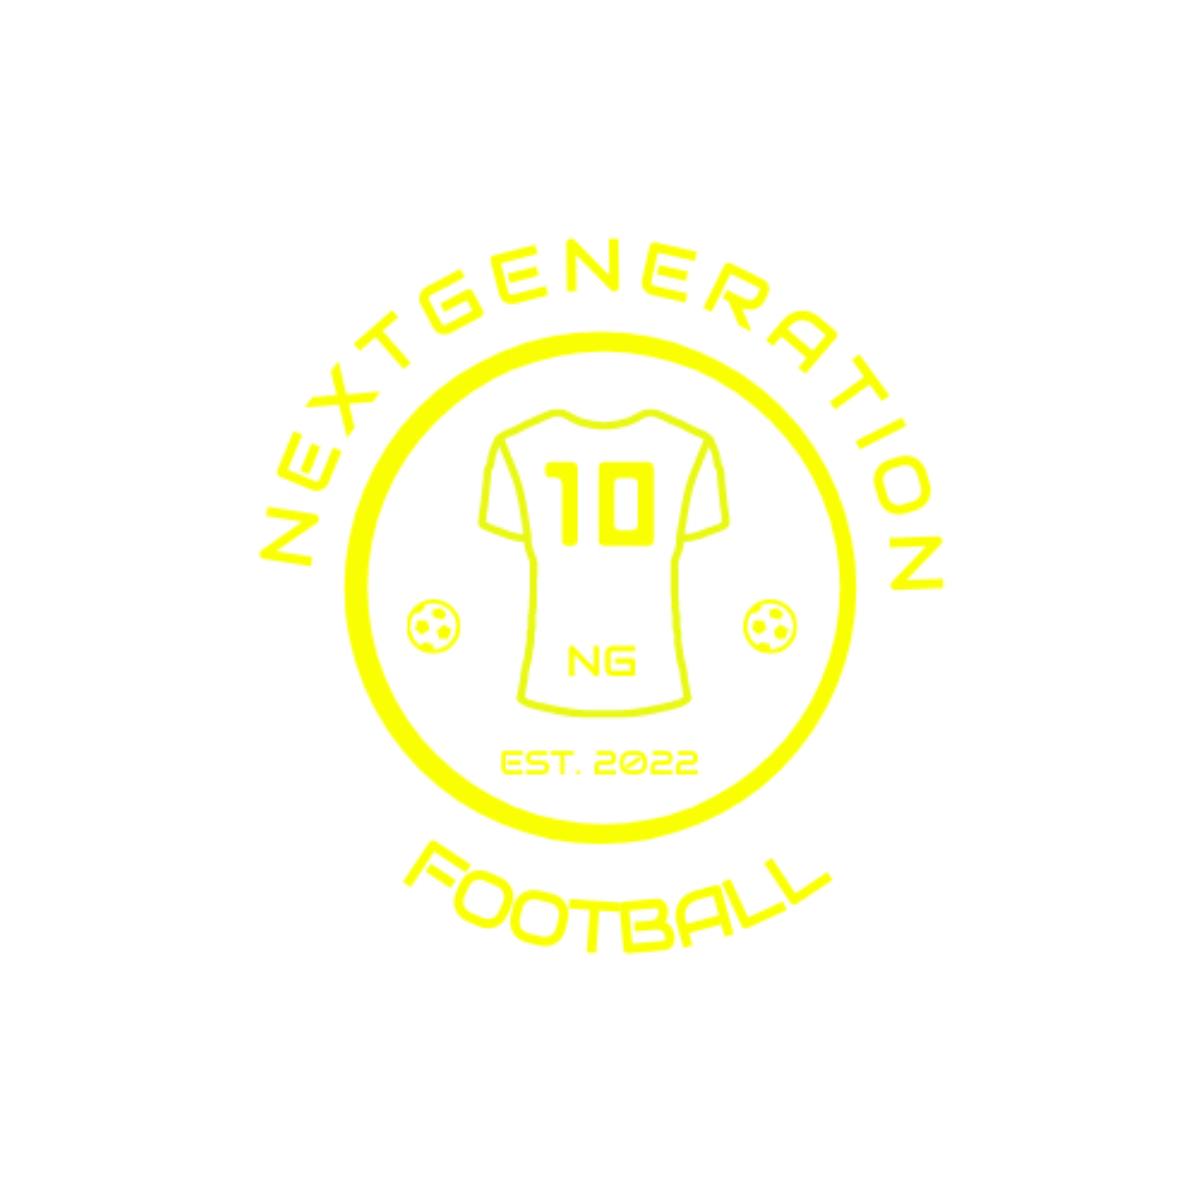 to the official website of Next Generation Football Newbury